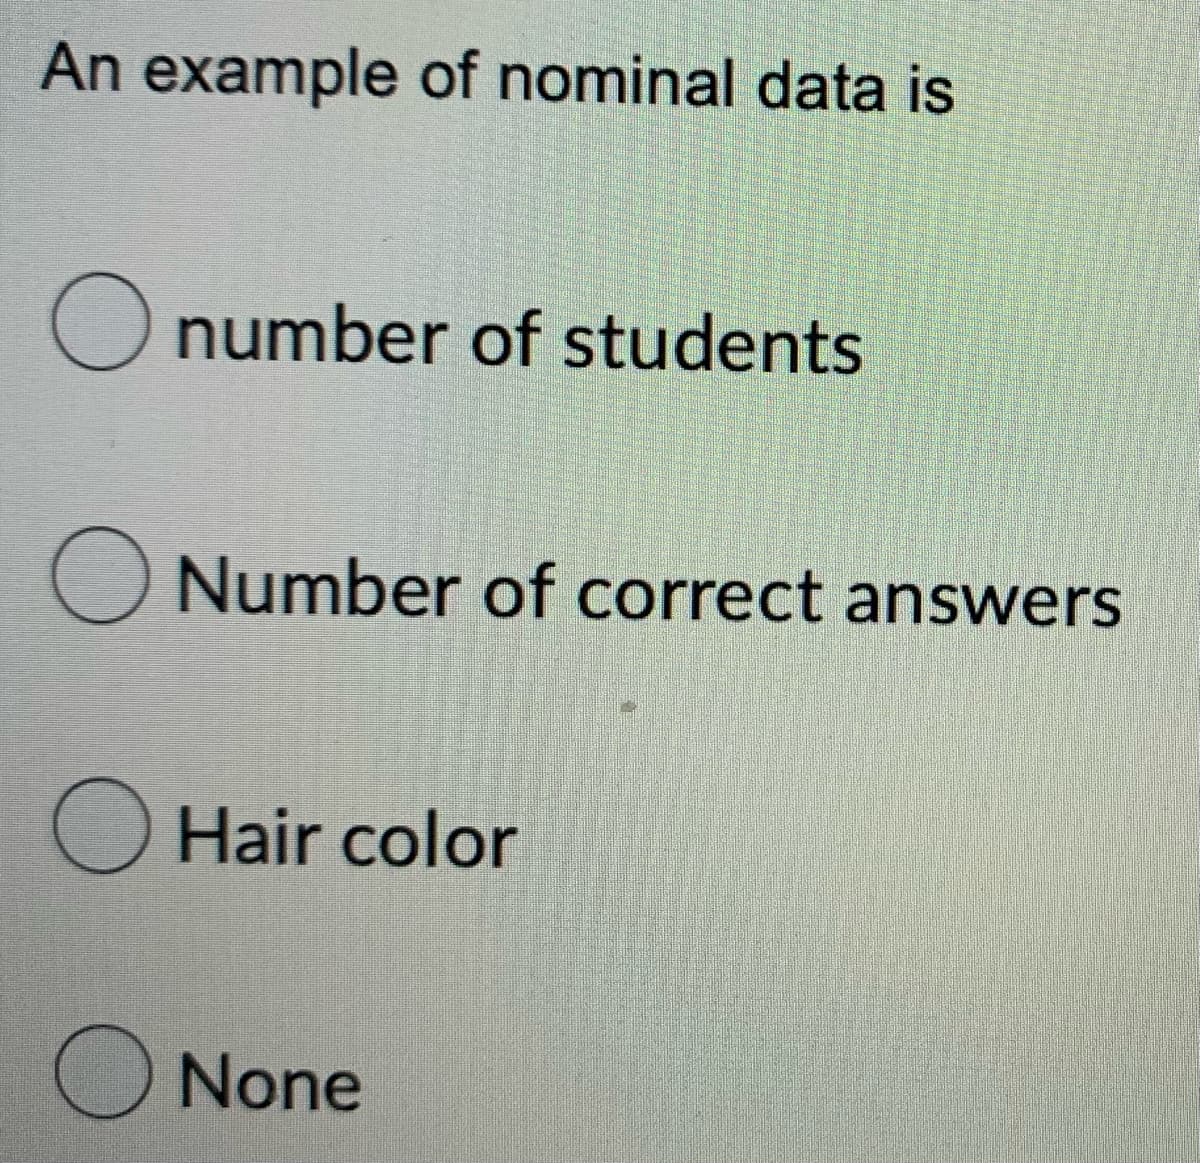 An example of nominal data is
O number of students
Number of correct answers
Hair color
None